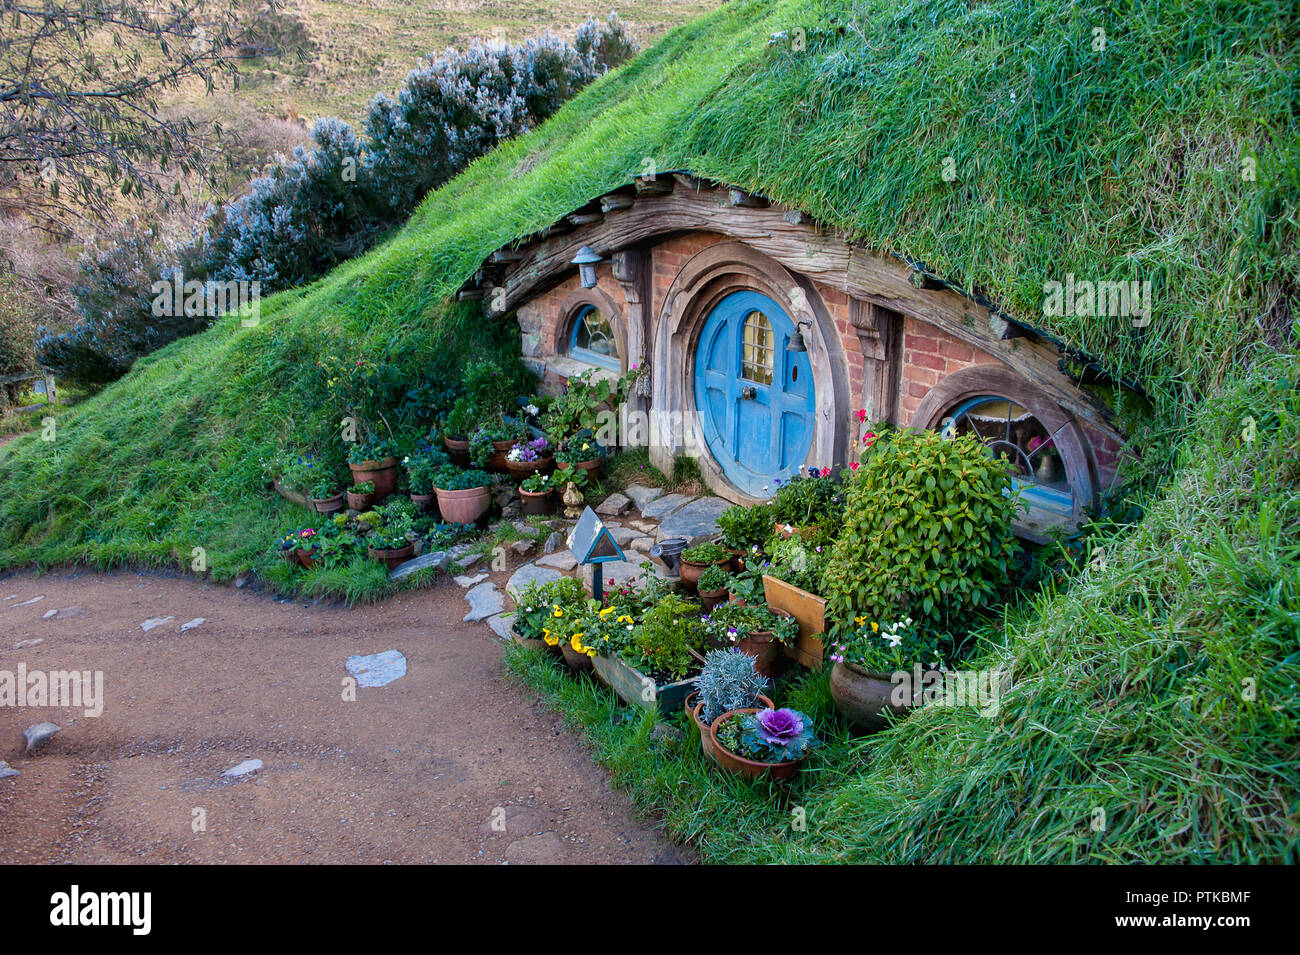 Matamata, New Zealand: Hobbiton movie set created to film Lord of the Rings and The Hobbit. House with blue door nestled into the hillside Stock Photo